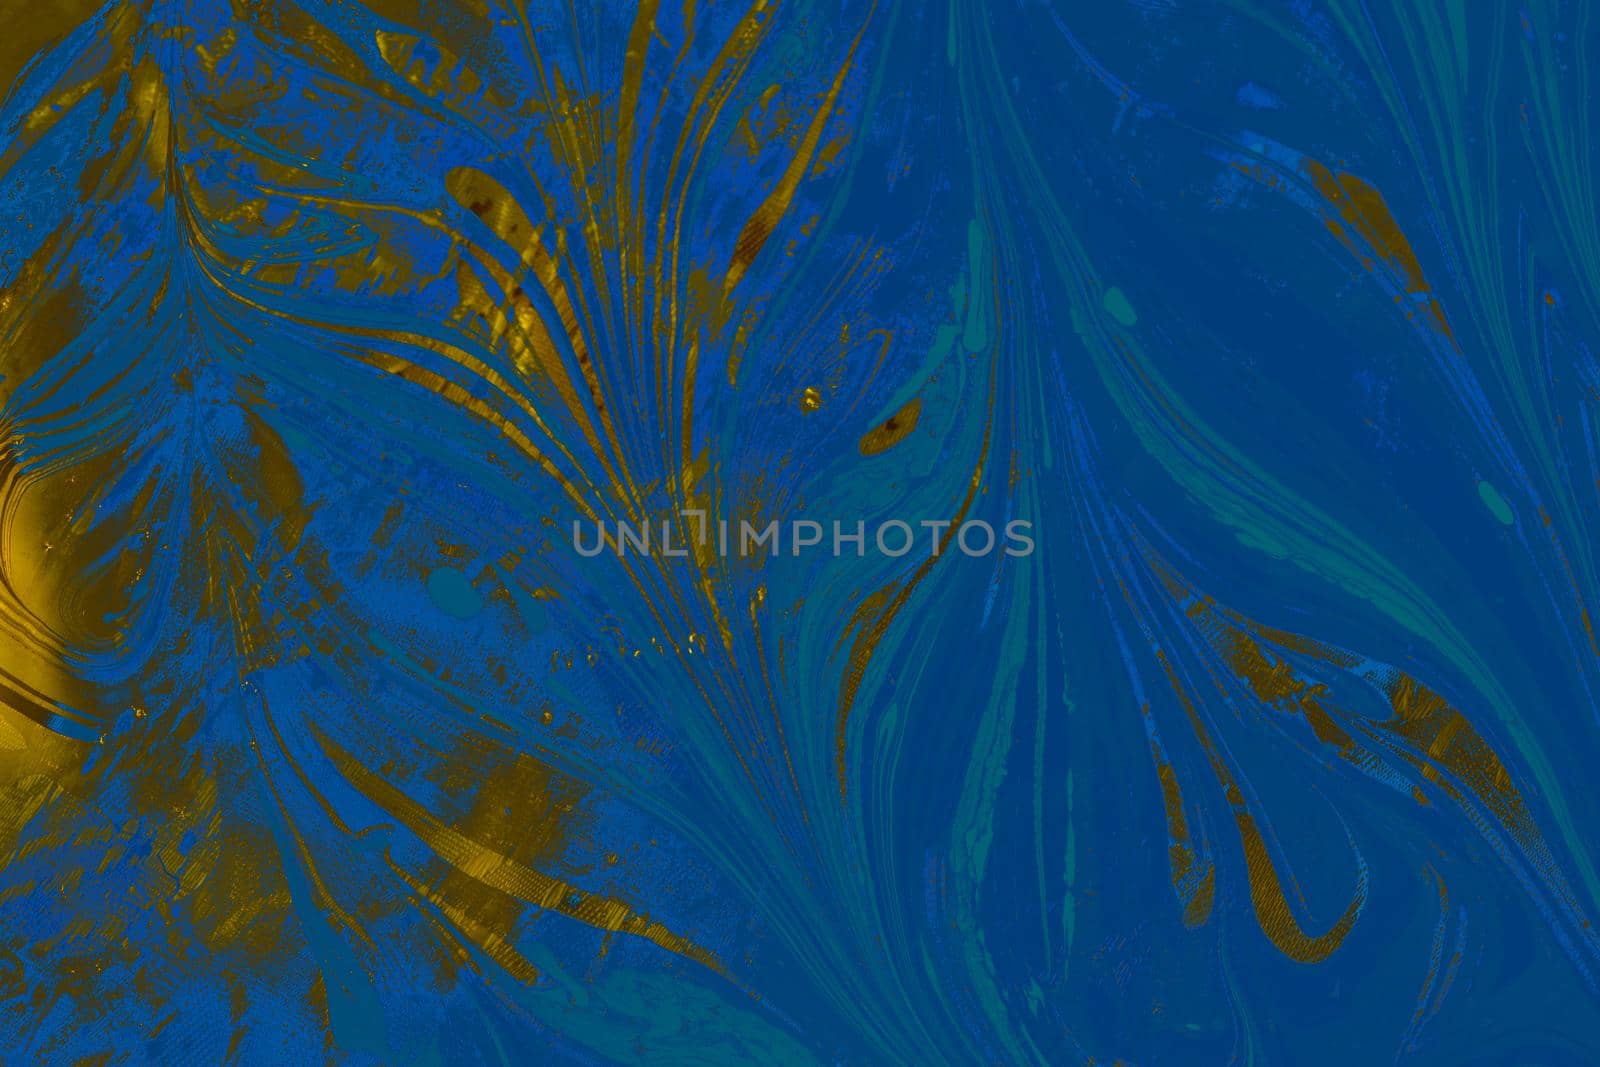 Abstract grunge art background texture with colorful paint splashes
 by berkay